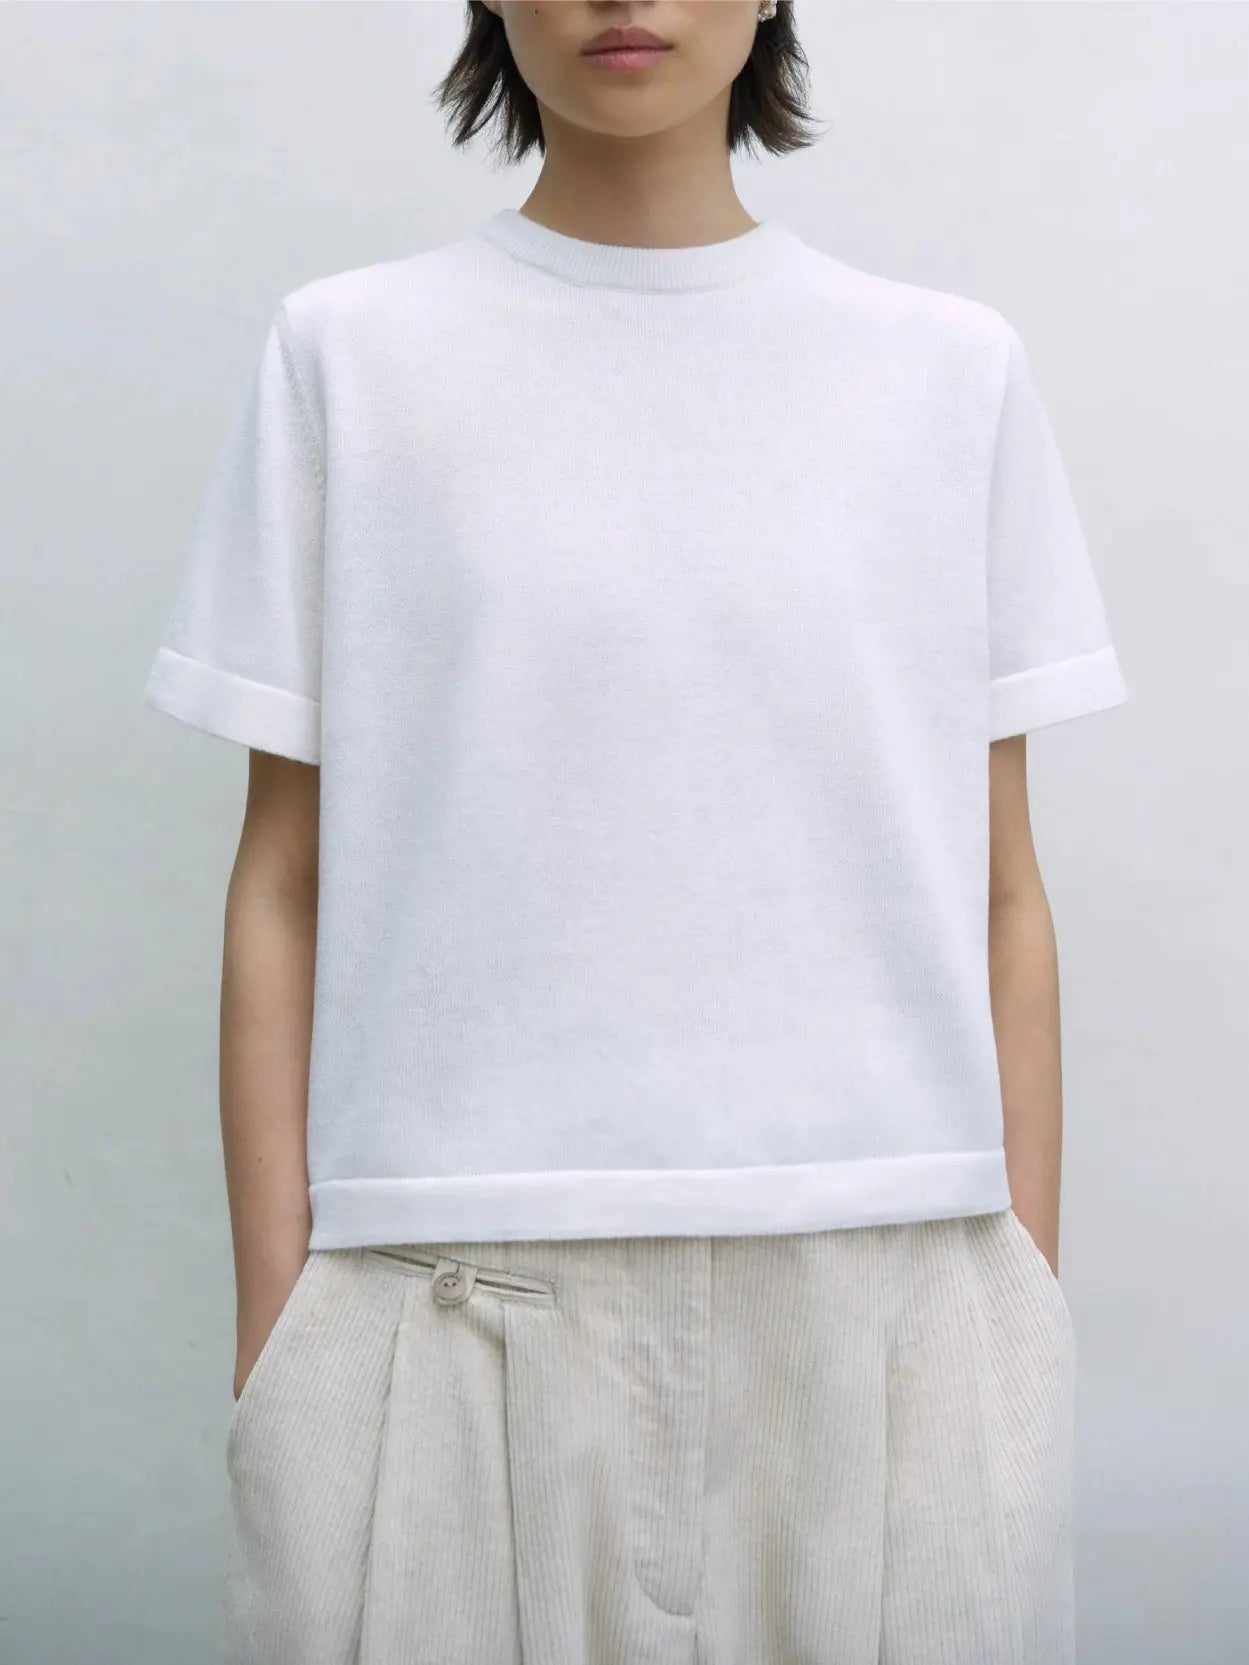 A plain white short-sleeve Merino Wool T-Shirt from Cordera is displayed against a white background. The T-shirt, available at this trendy Barcelona store, features a round neckline and a simple, clean design with no visible logos or patterns.